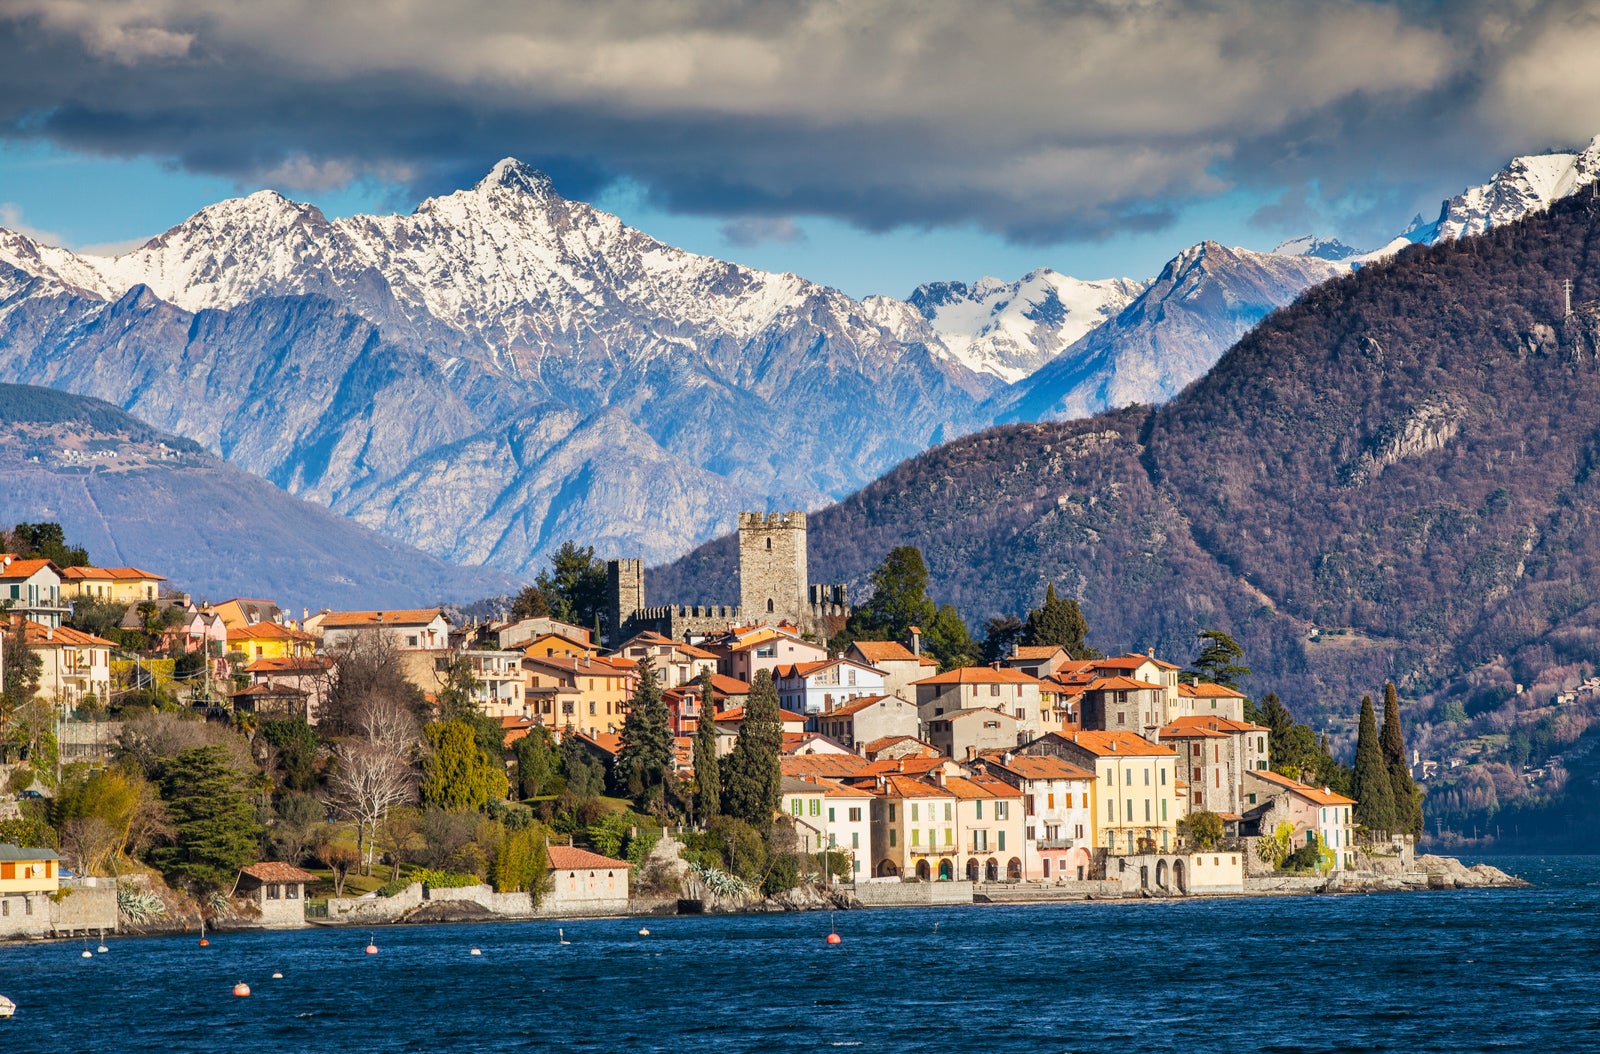 View of mountains and Lake Como, Italy